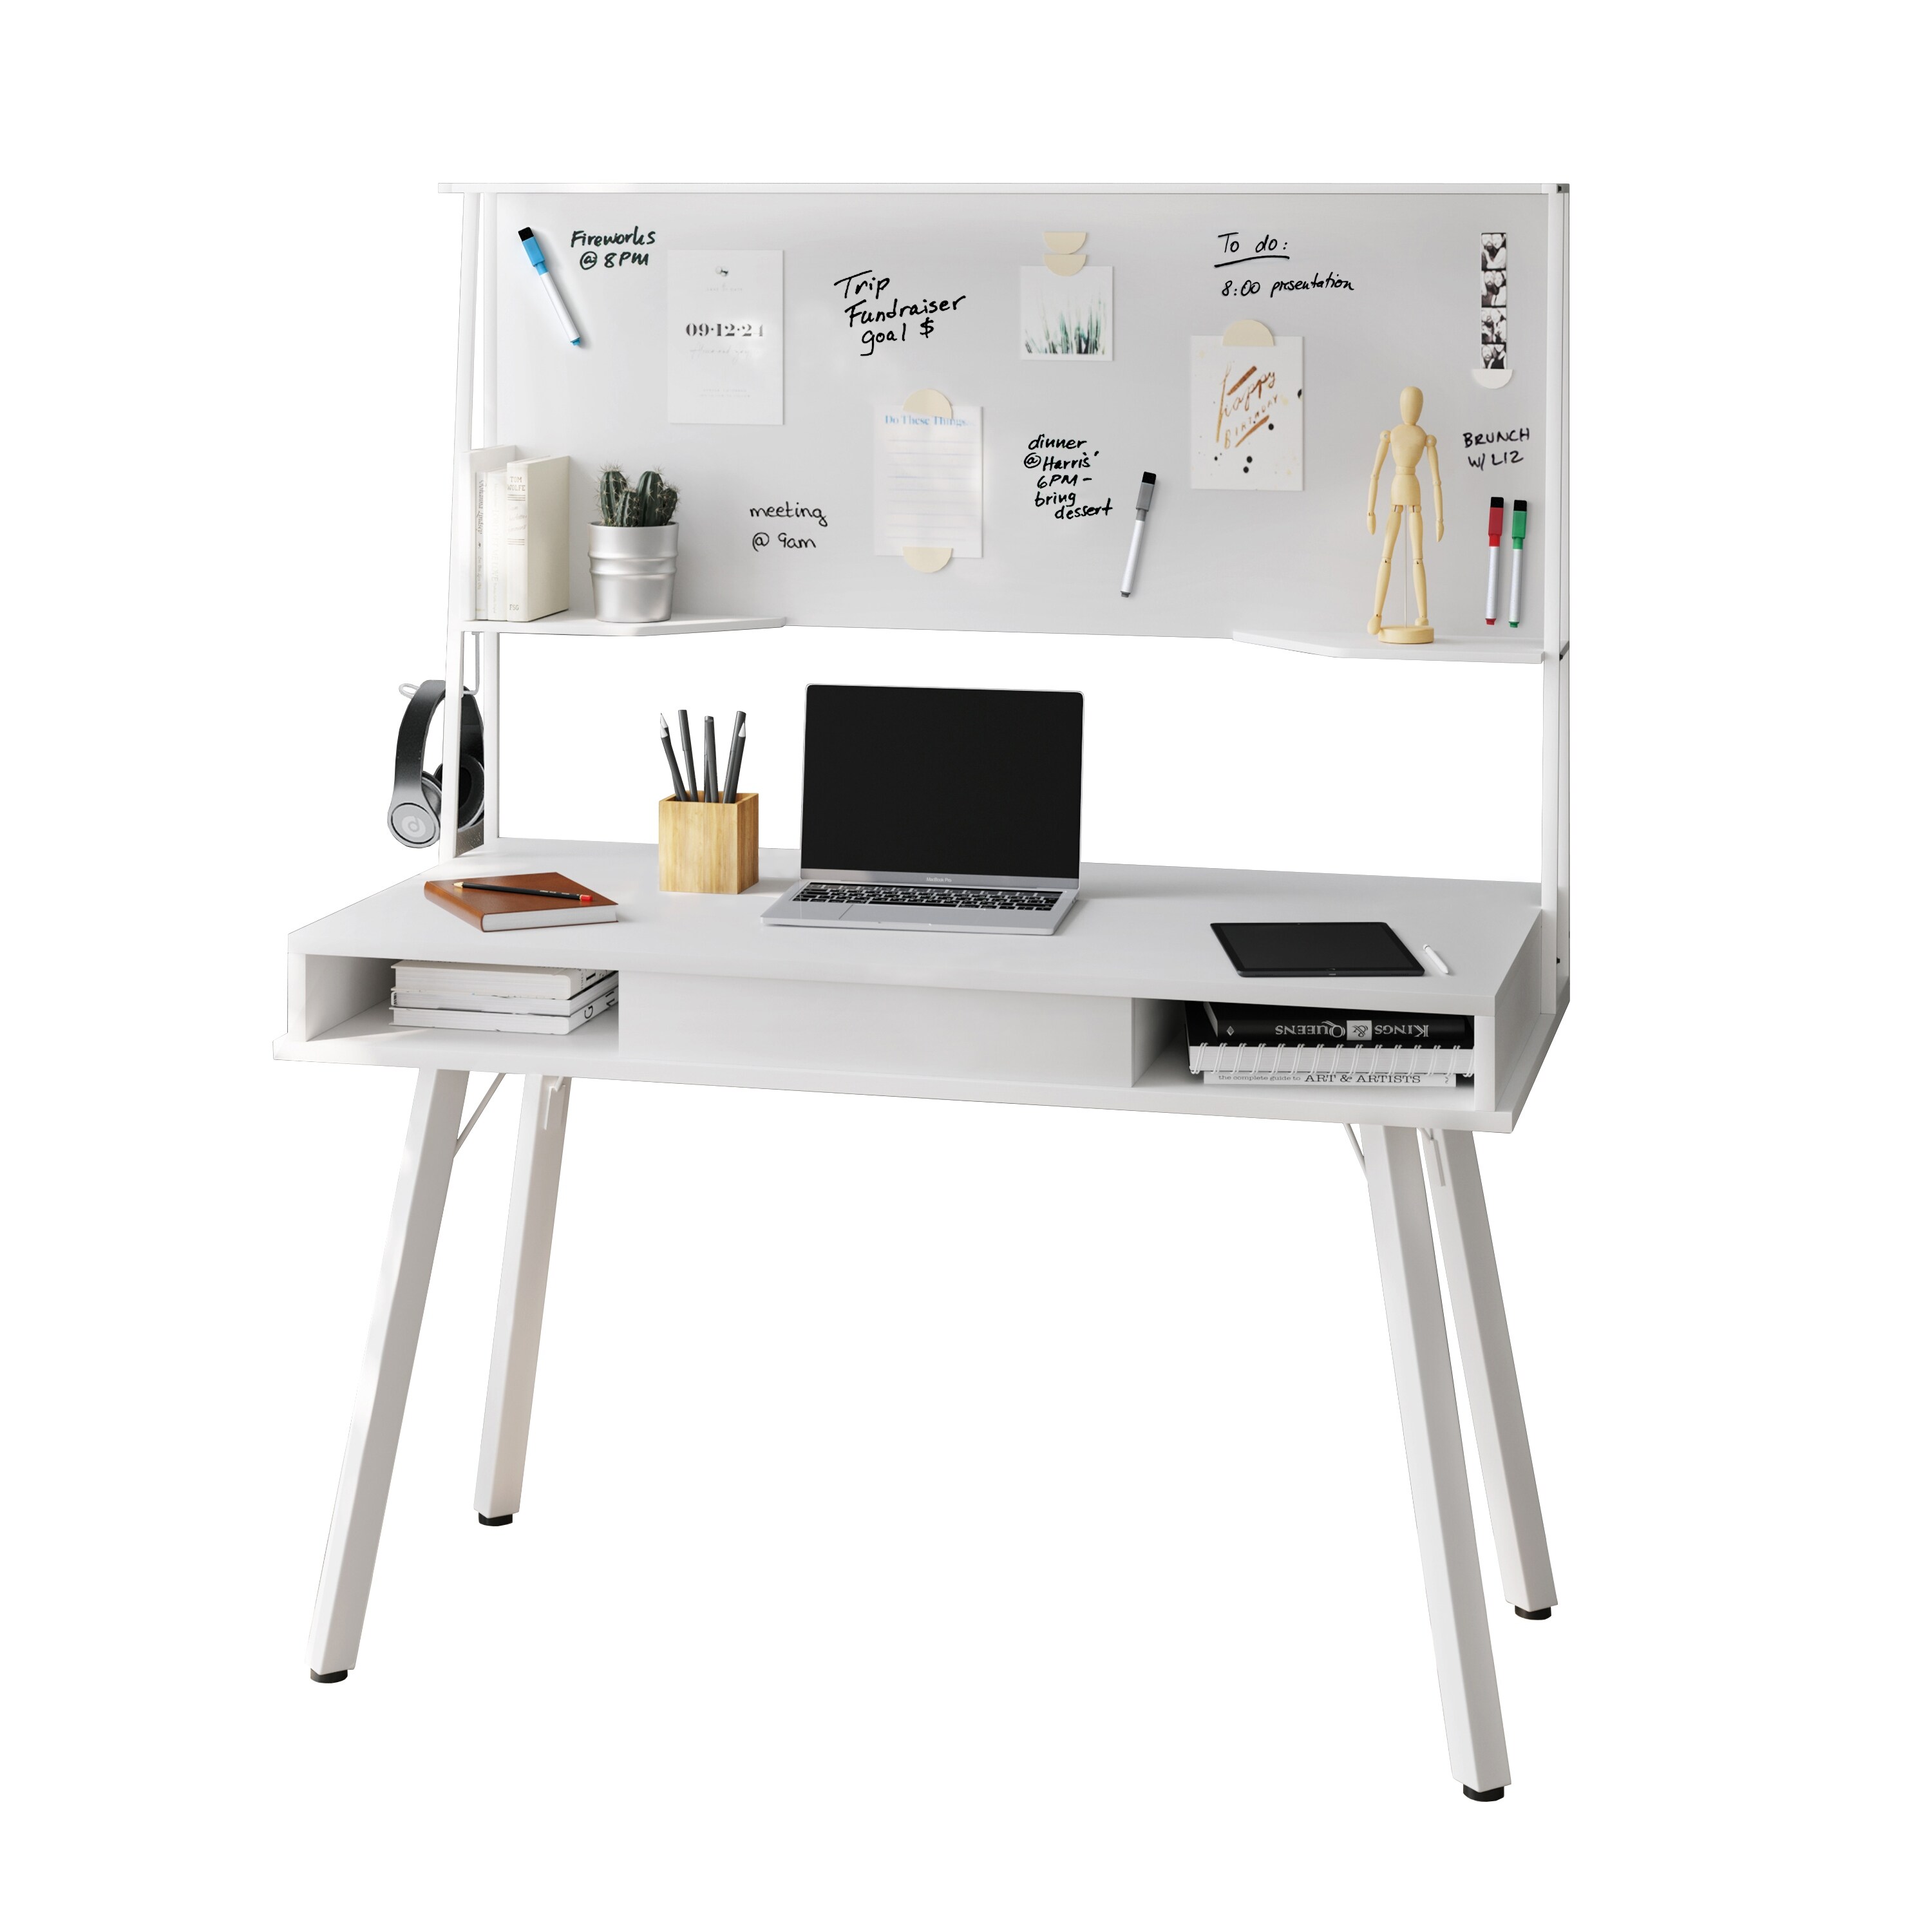 https://ak1.ostkcdn.com/images/products/is/images/direct/8a9fdb5d9526a77dfa491f41f2eb37baa738c1ed/Study-Computer-Desk-with-Open-Storage%2C-One-Pull-Out-Drawer-%26-Magnetic-Dry-Erase-White-Board-Home-Office-Desk%2C-White.jpg